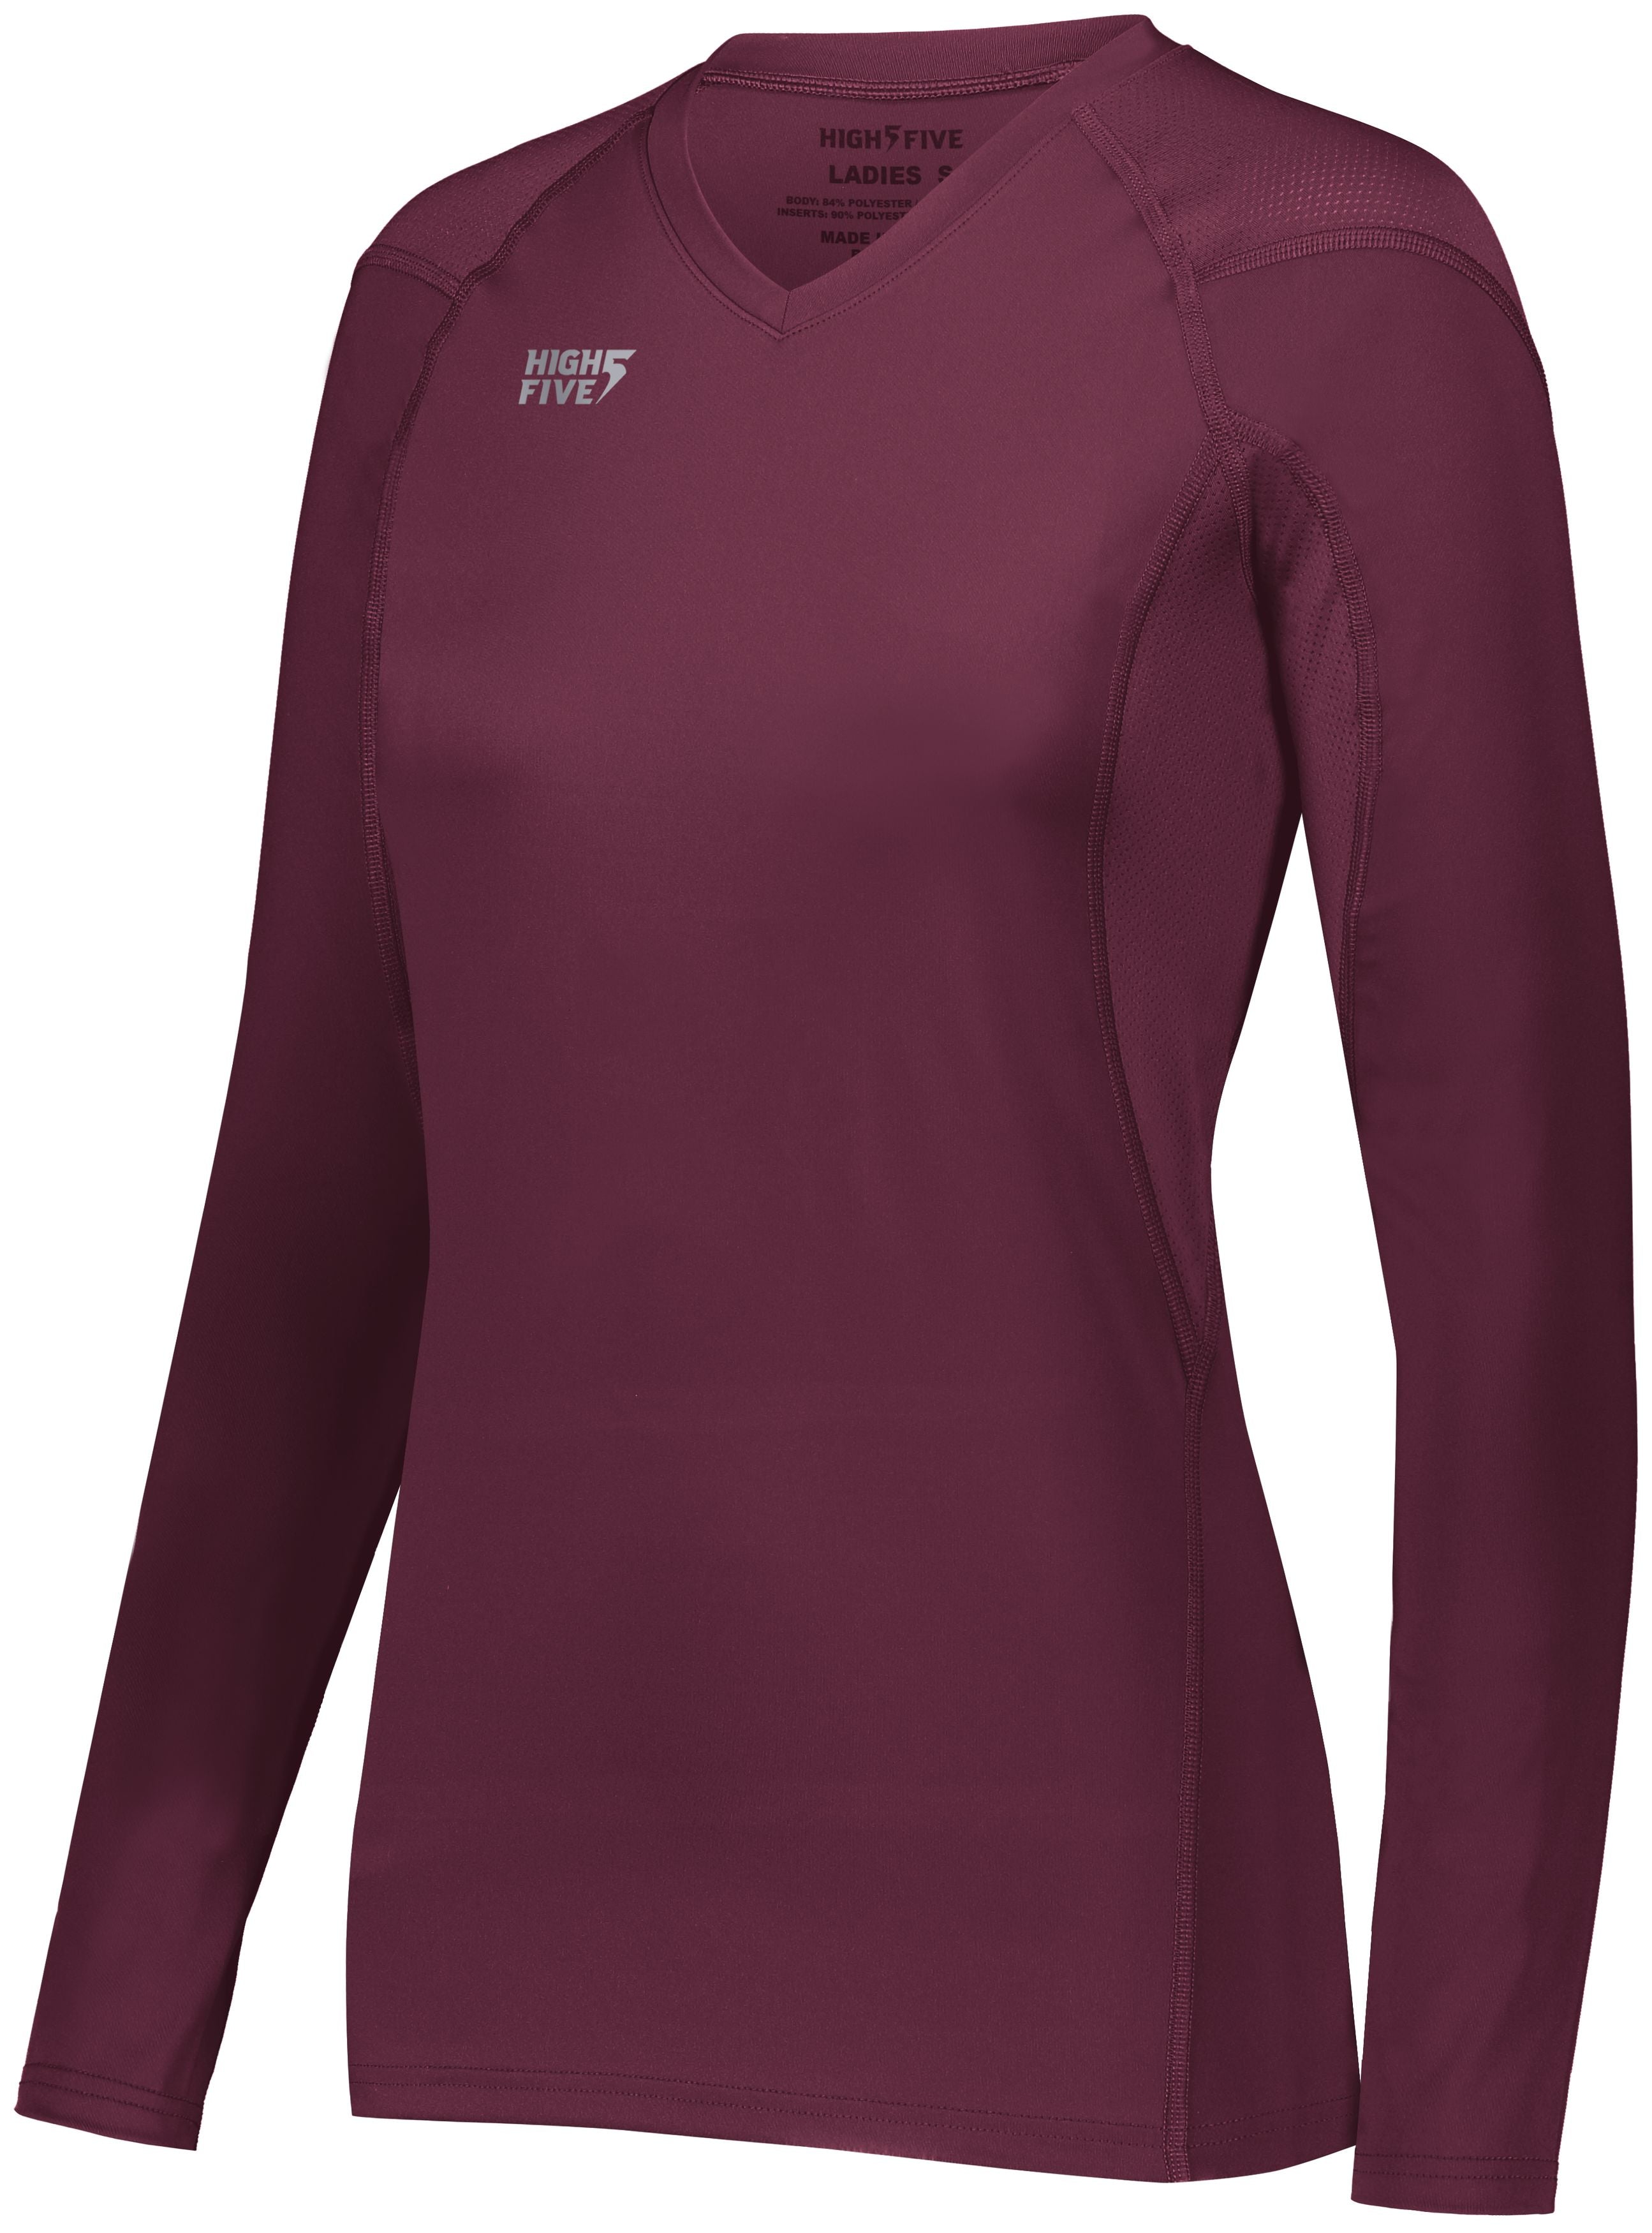 High 5 Ladies Truhit Long Sleeve Jersey in Maroon (Hlw)  -Part of the Ladies, Ladies-Jersey, High5-Products, Volleyball, Shirts product lines at KanaleyCreations.com